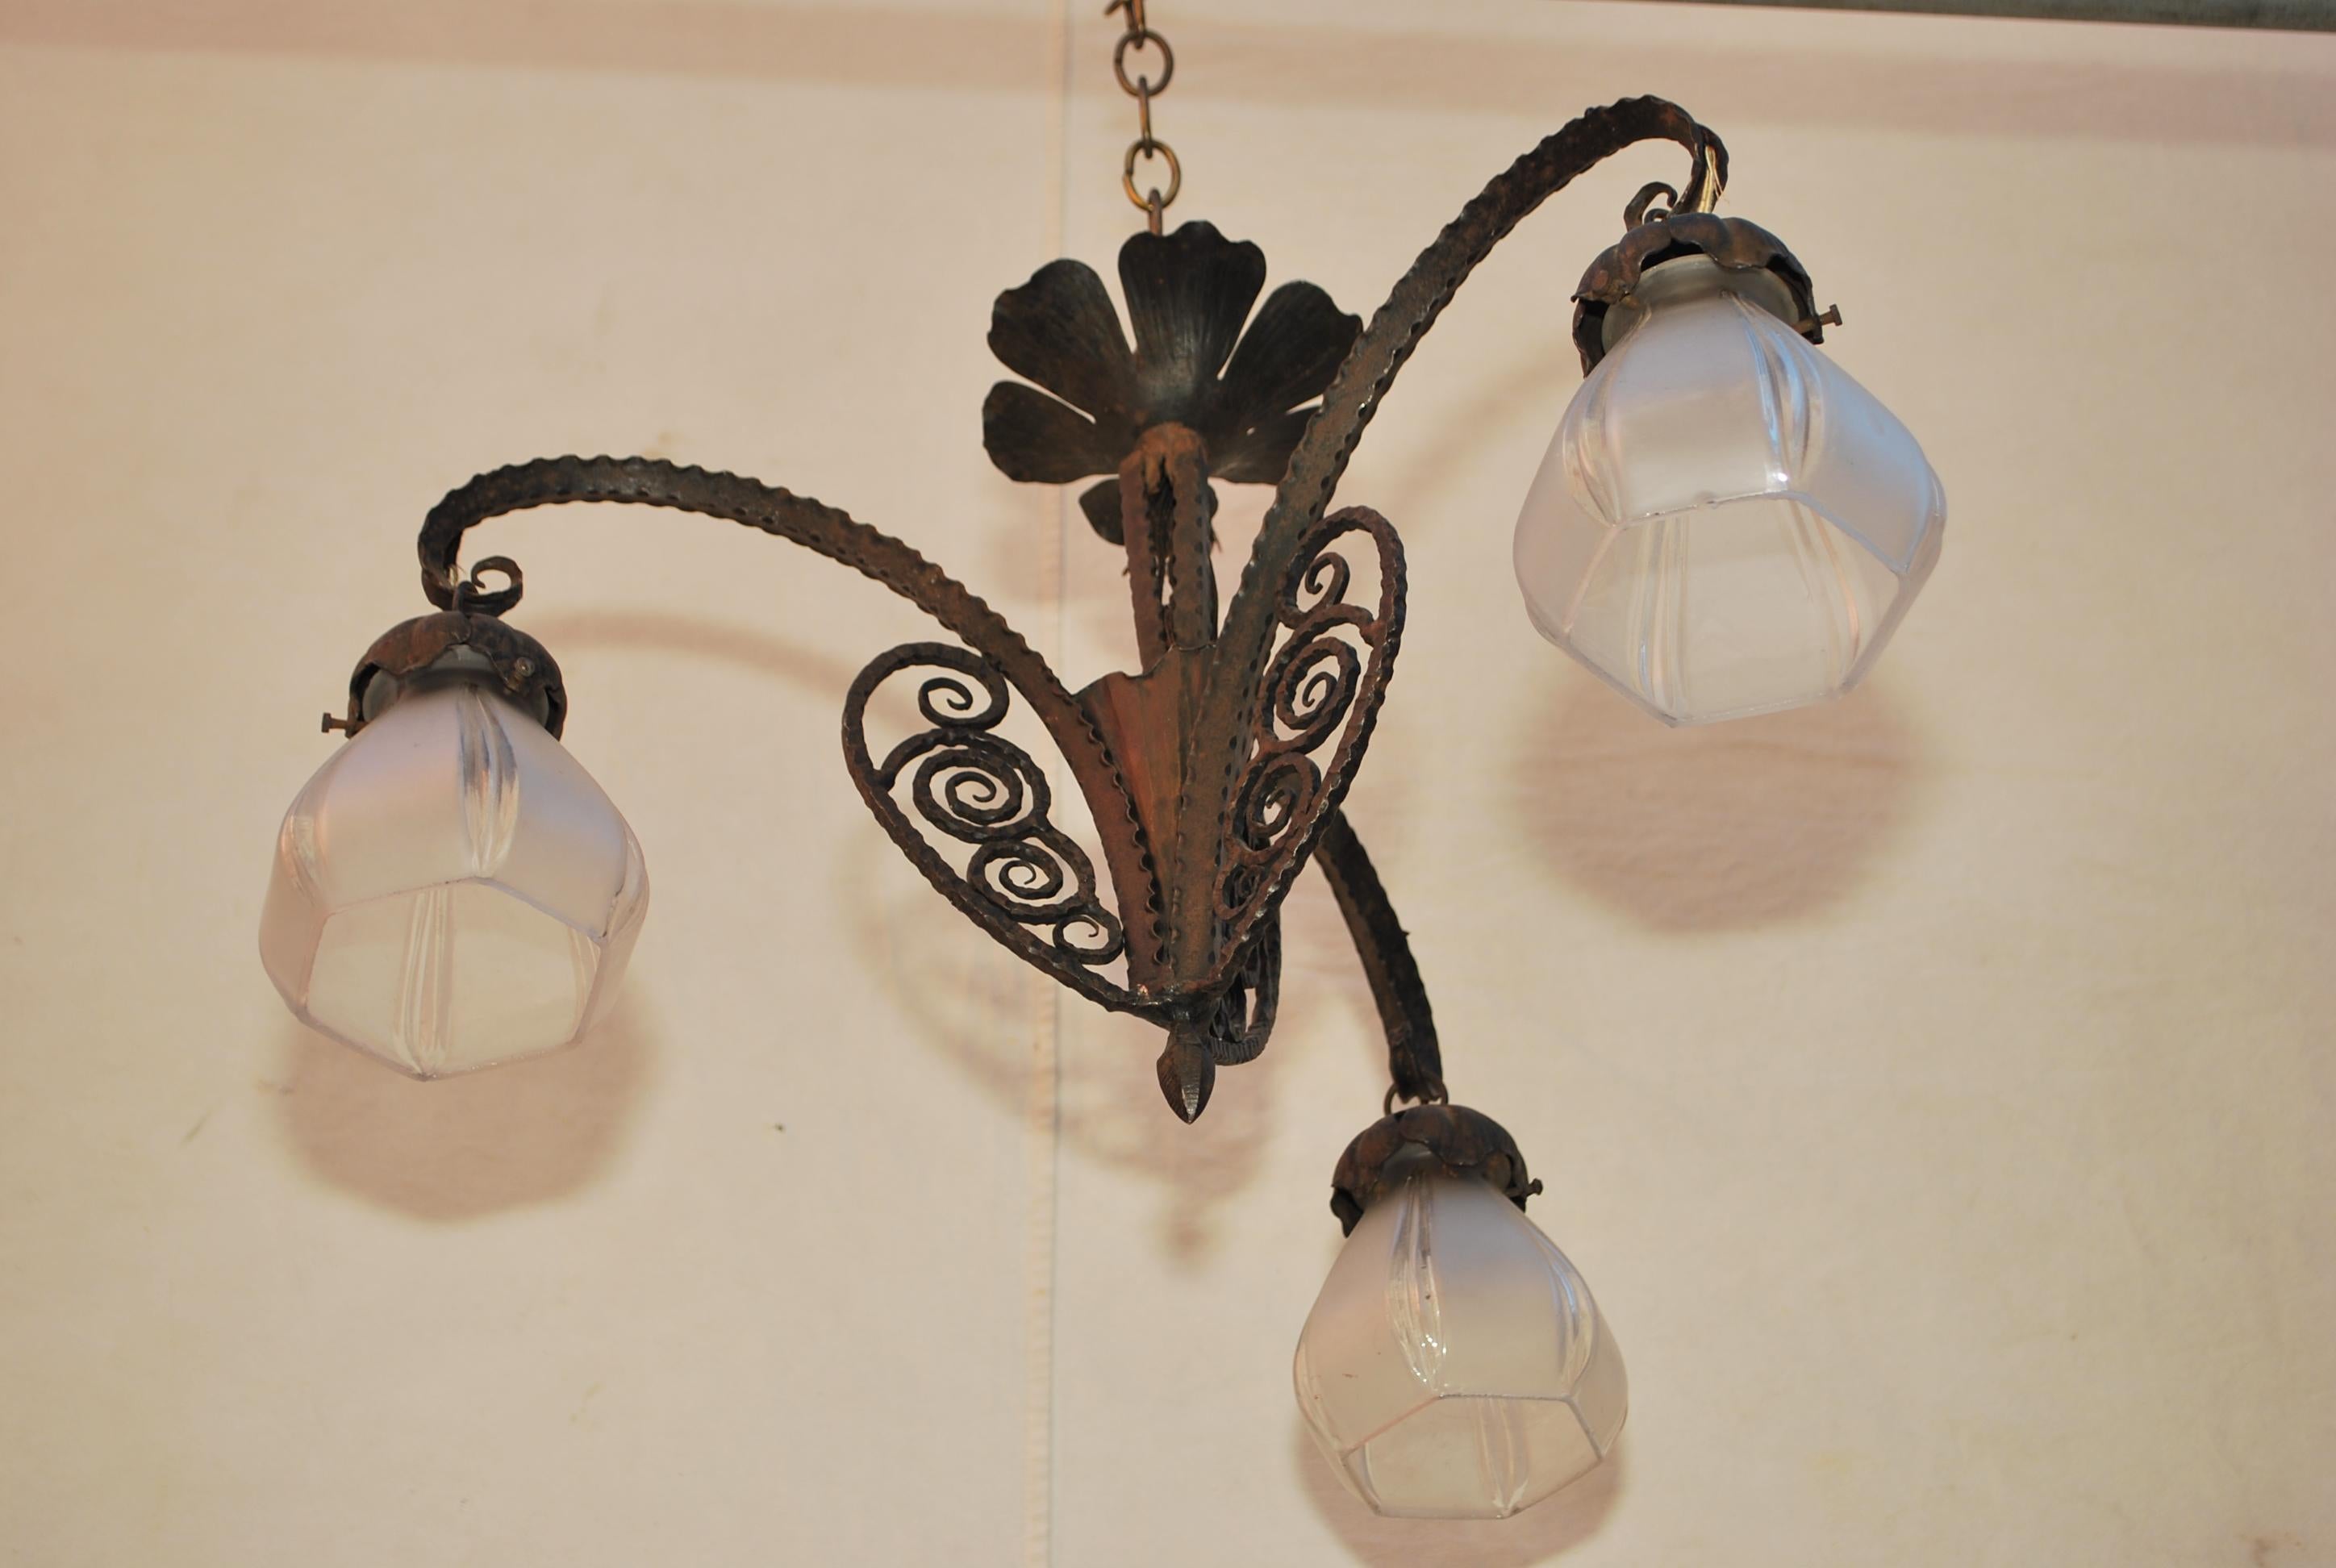 A beautiful French Art Deco wrought iron chandelier, the patina is so much nicer in person